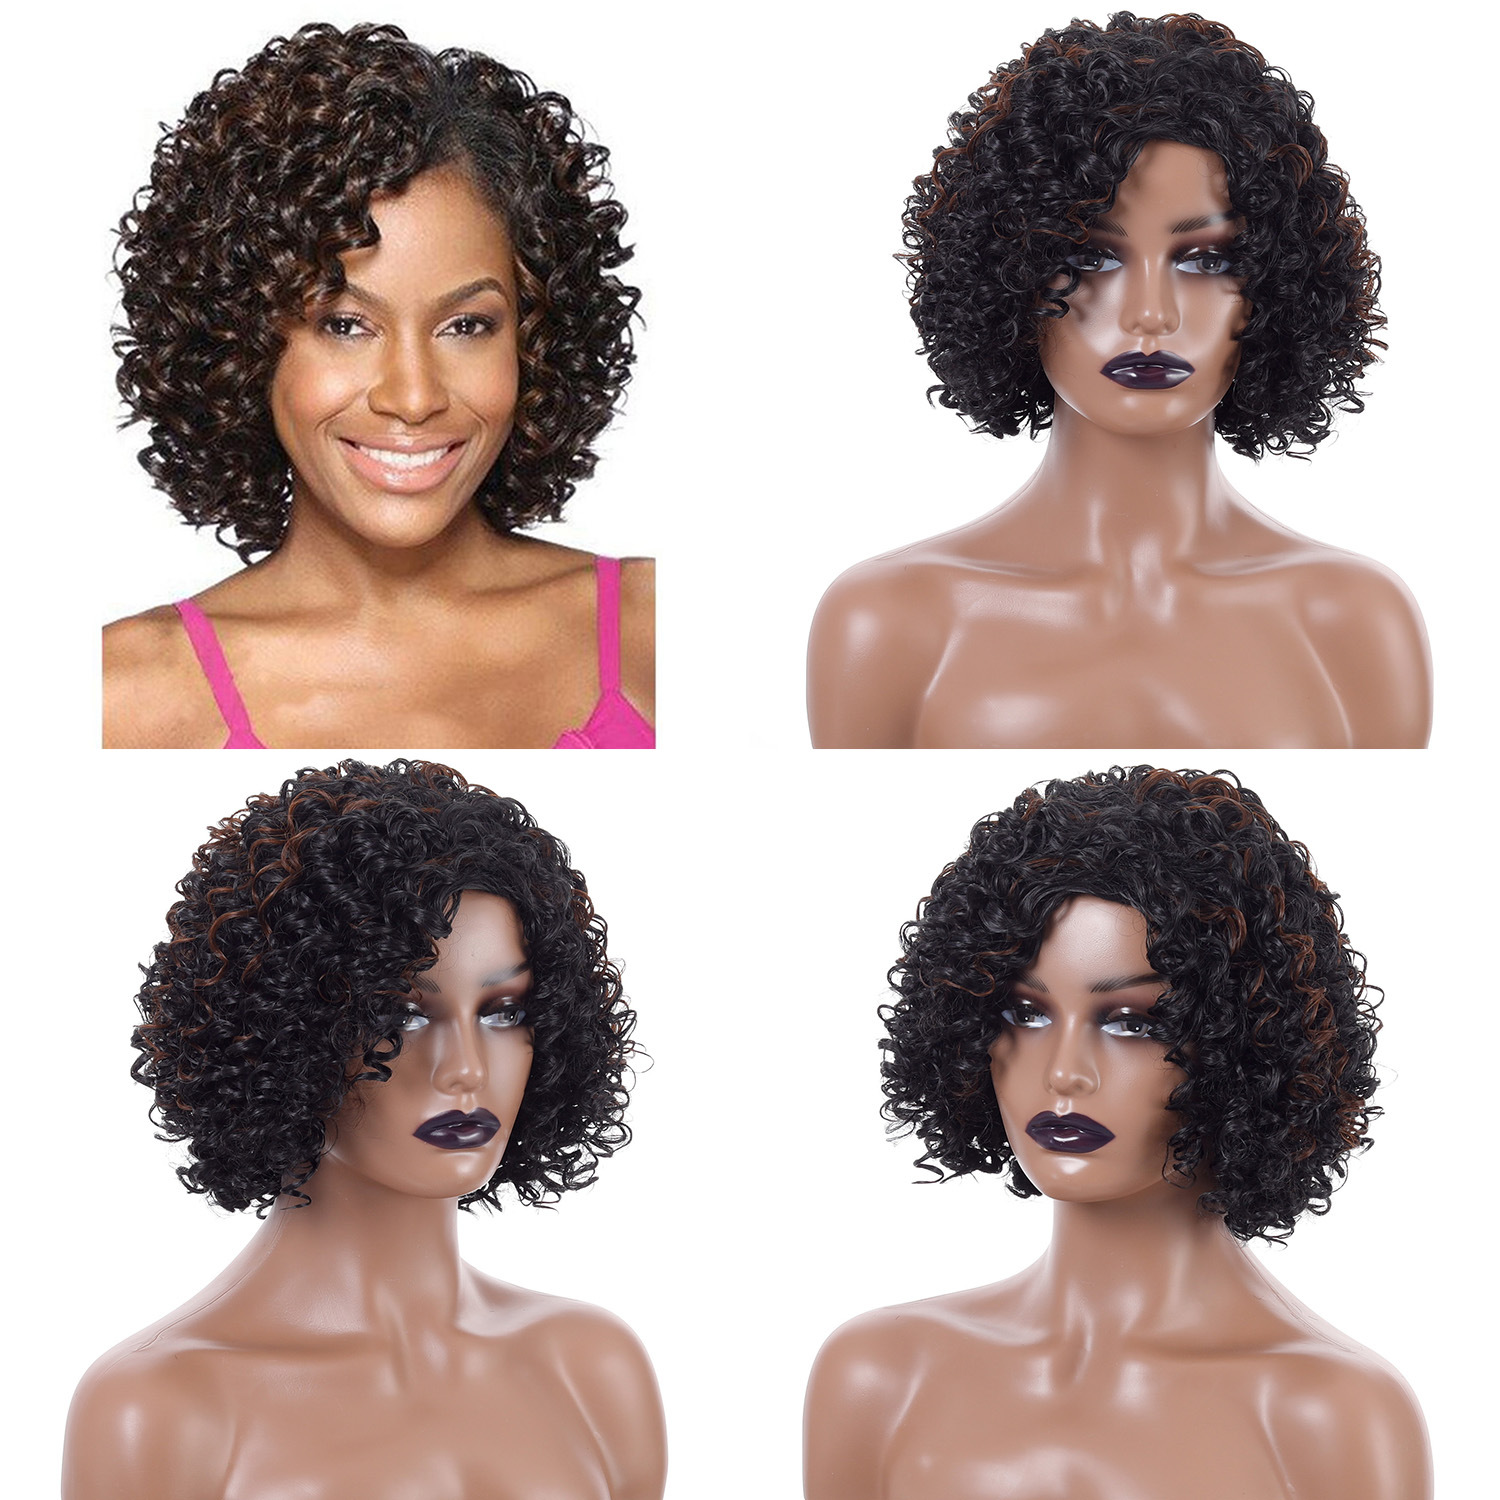 Stylish black highlight brown synthetic wig with short curly hair, includes afro small curly wig headgear for women